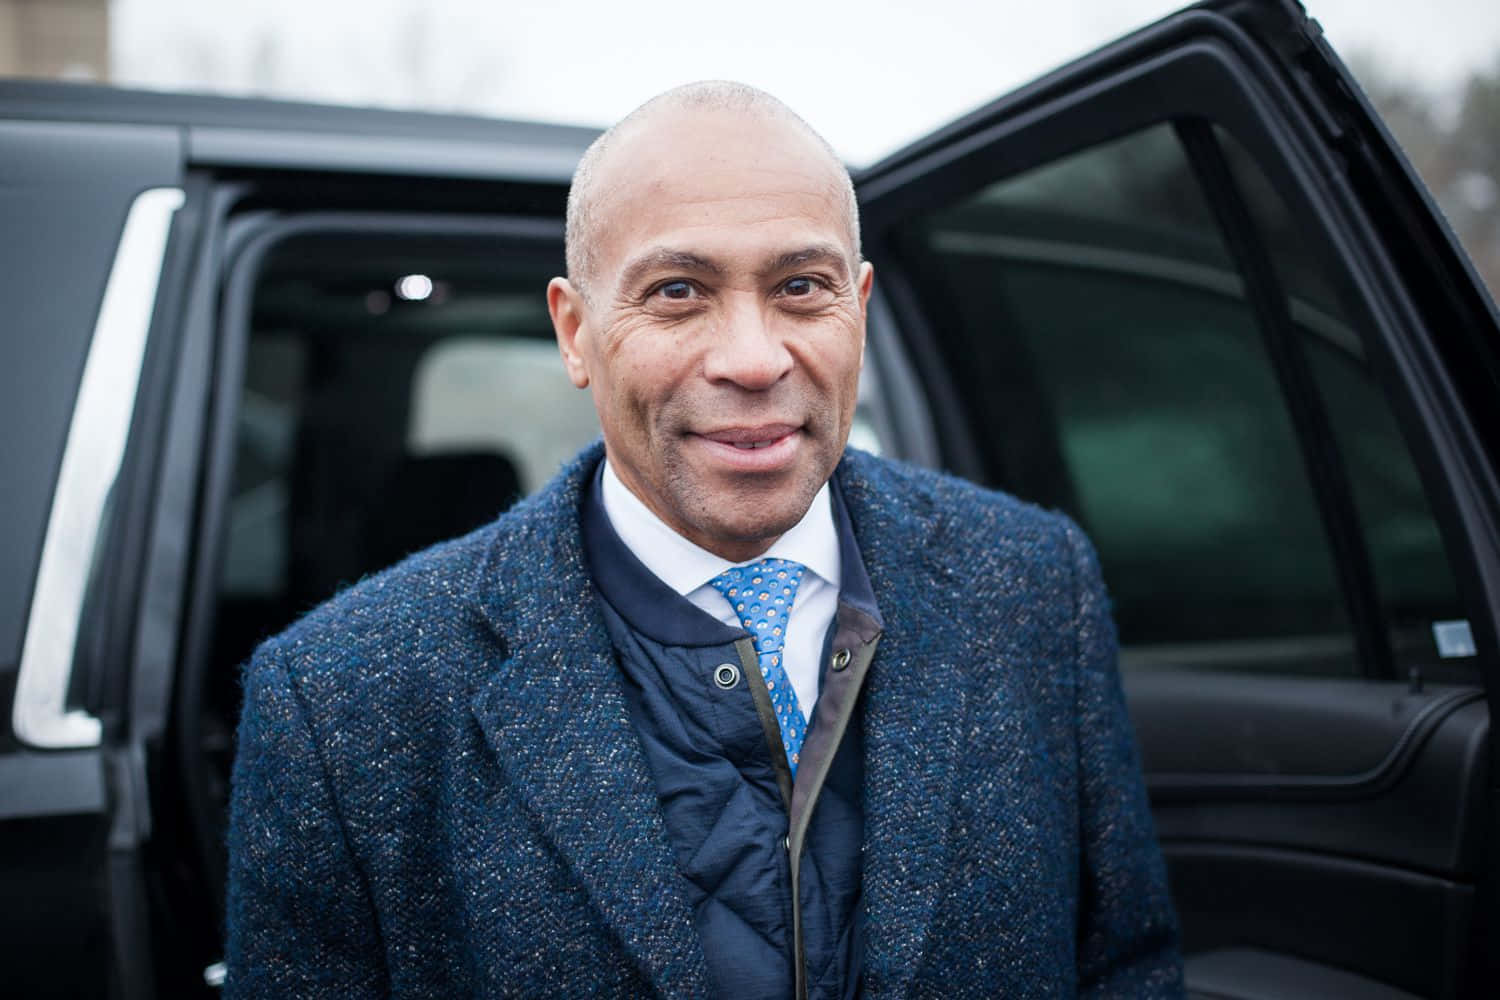 Former Massachusetts Governor Deval Patrick Getting into a Car Wallpaper